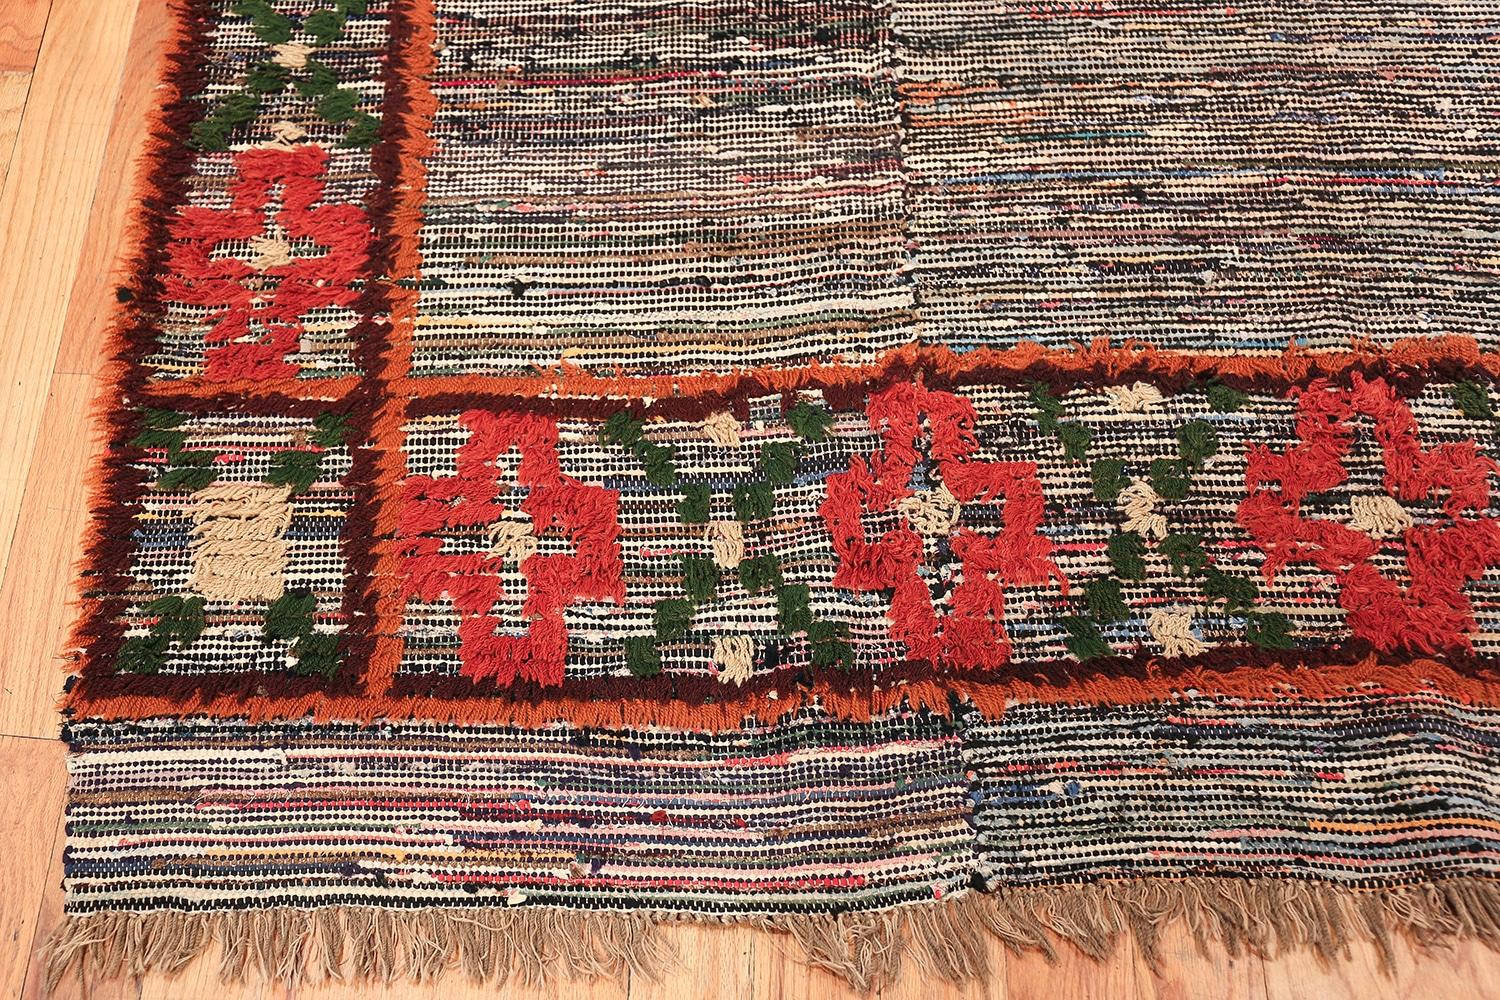 Vintage Swedish rug, Country of Origin: Sweden, Circa date: Turn Of the 20th Century. Size: 6 ft. 4 in x 9 ft. 4 in (1.93 m x 2.84 m)

